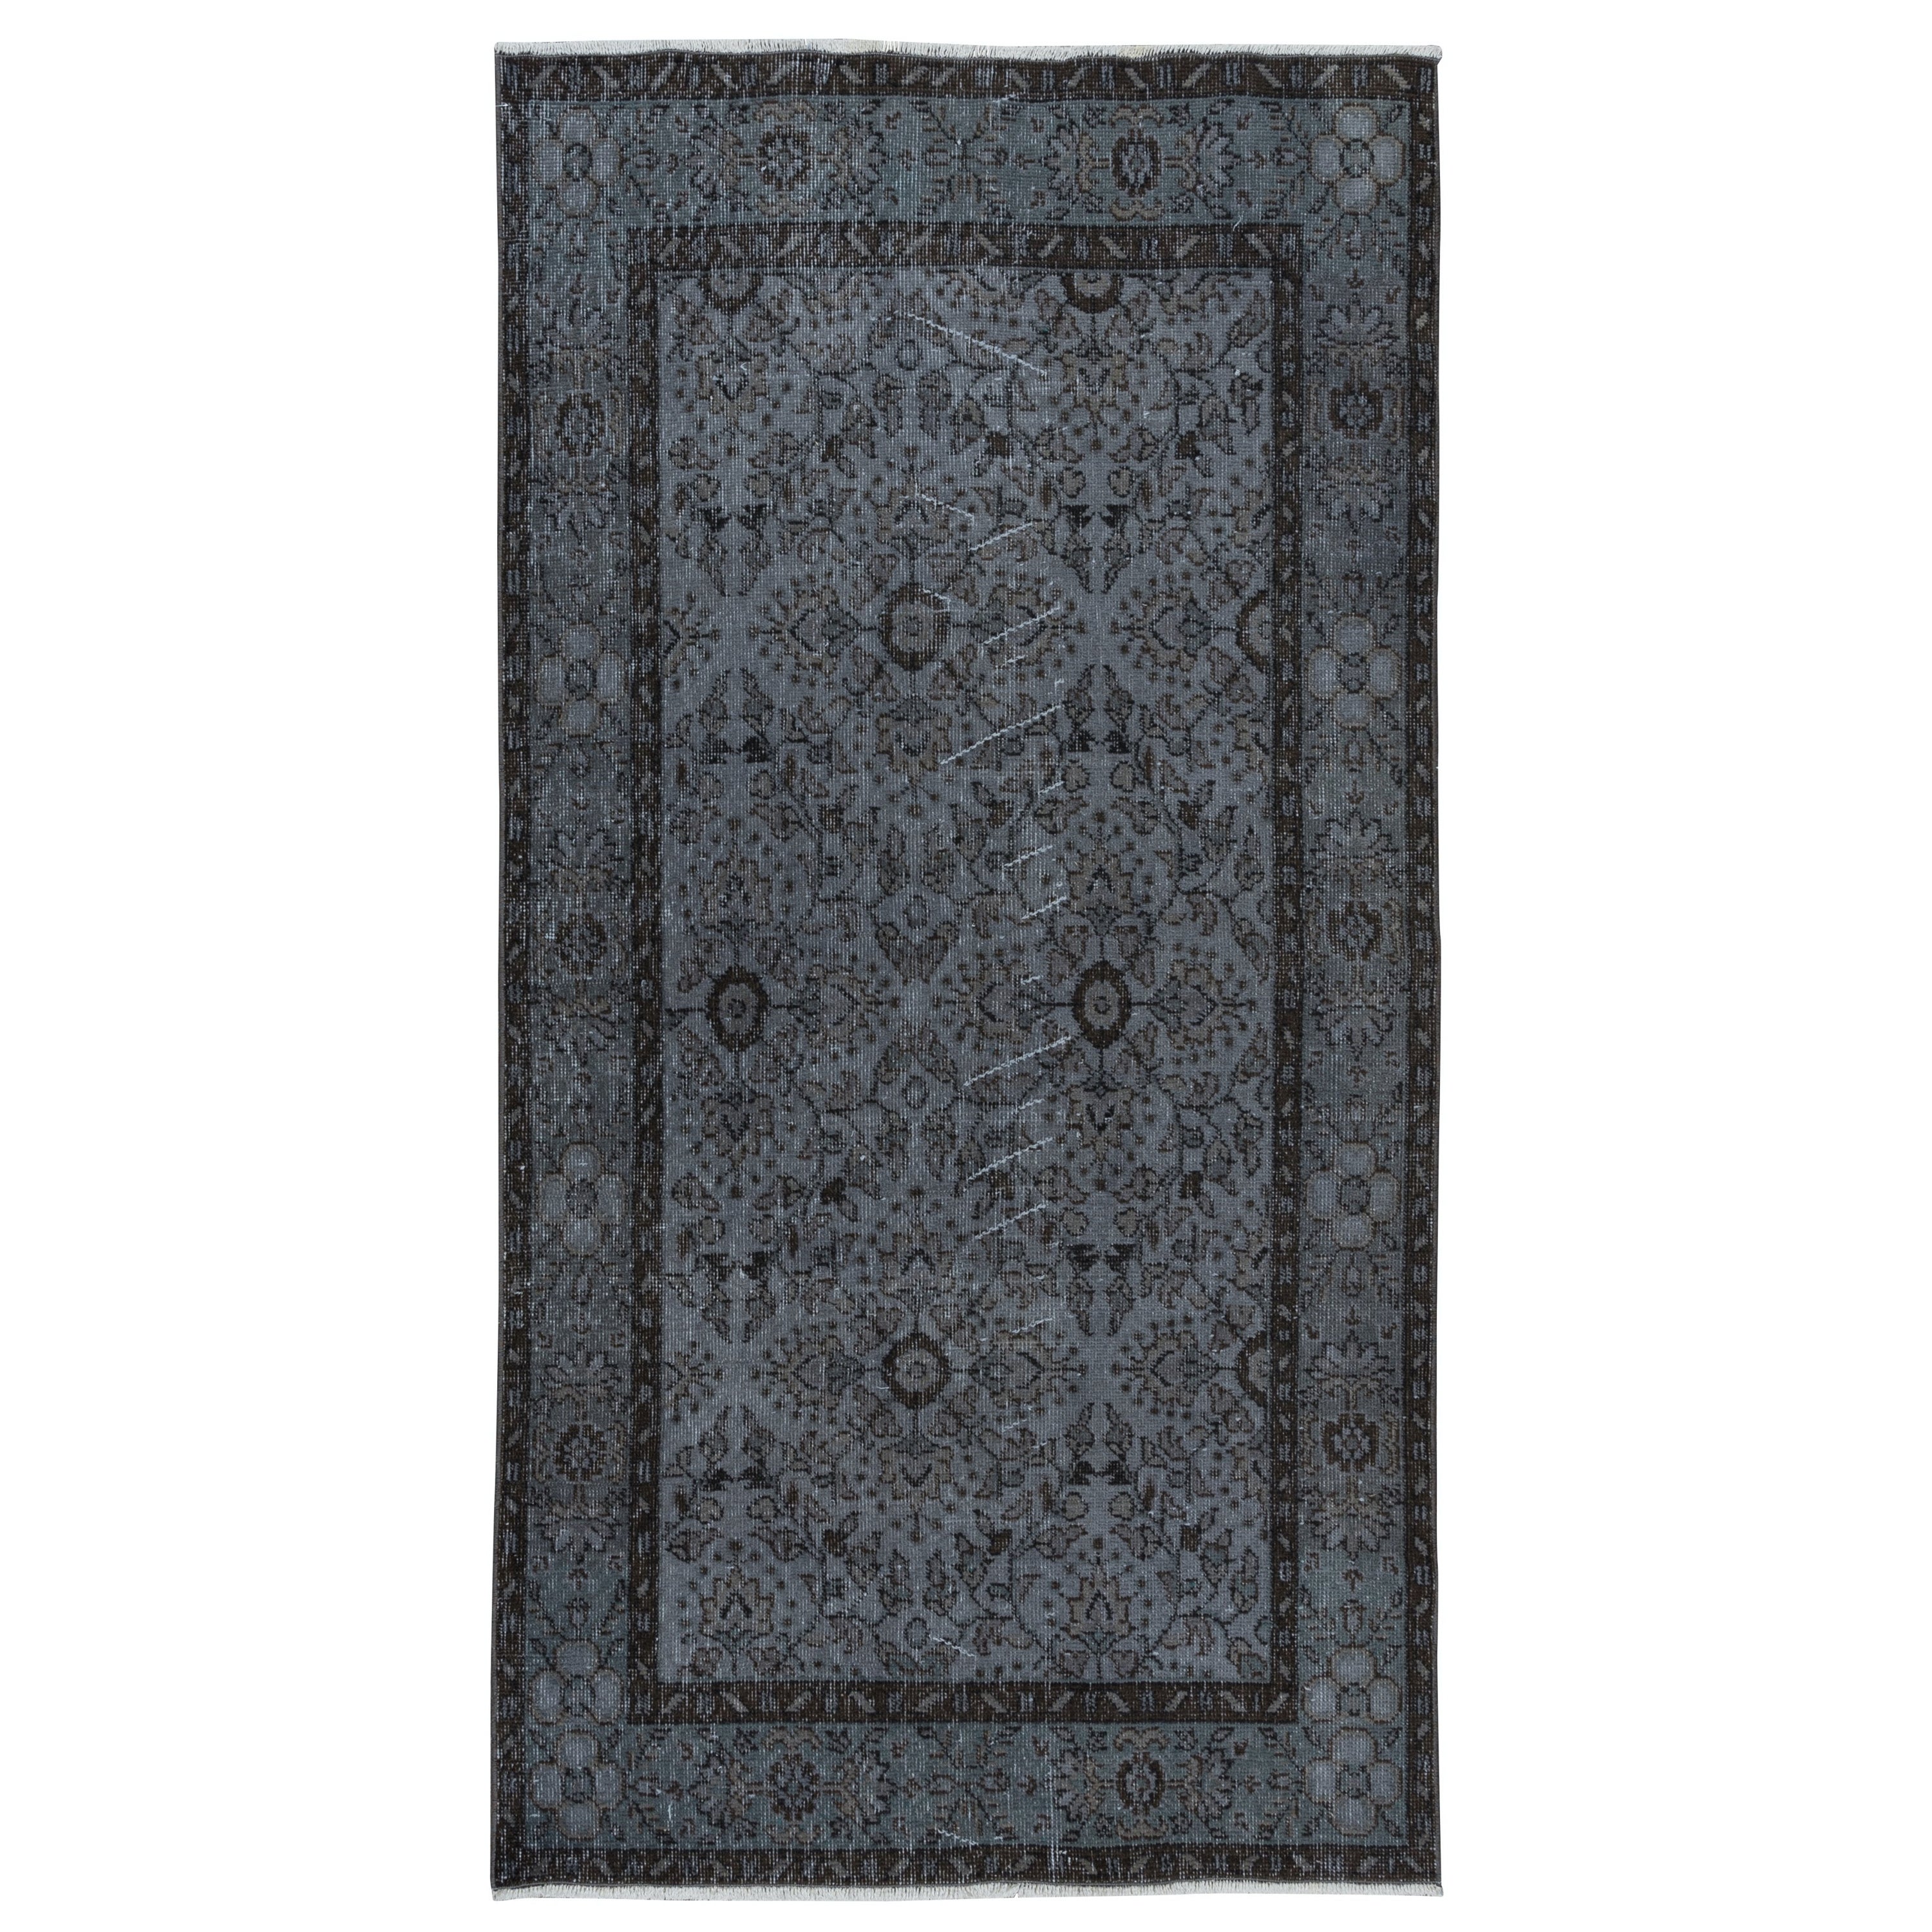 3.6x6.8 Ft Small Handmade Turkish Rug with Iron Gray Field and Floral Design For Sale